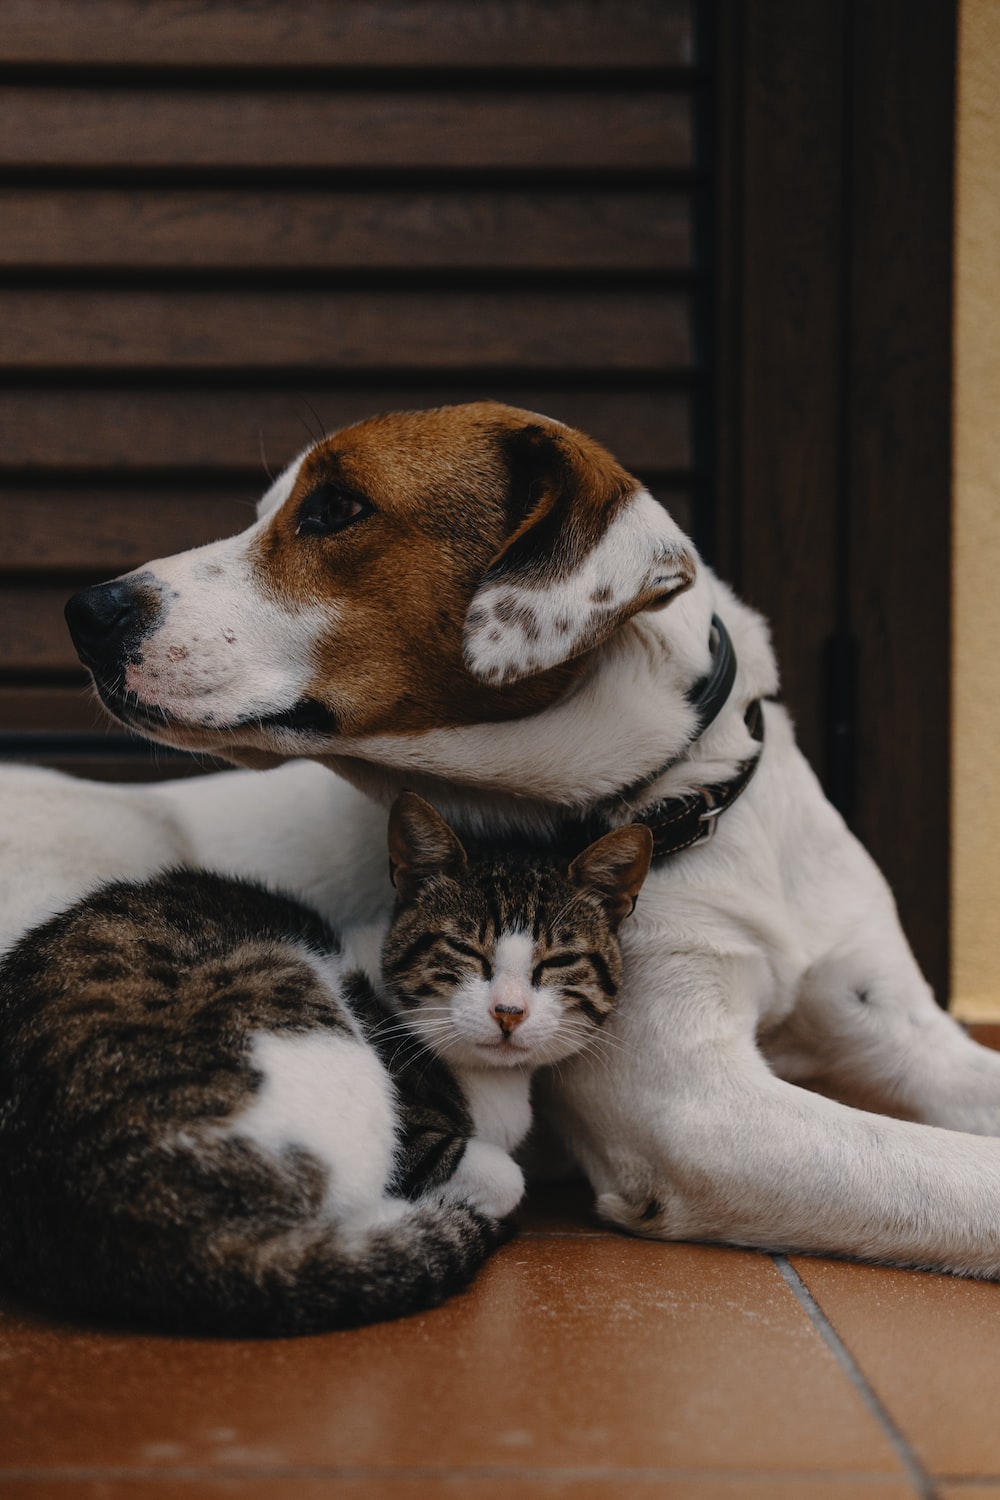 [HQ] Cat And Dog Picture. Download Free Image